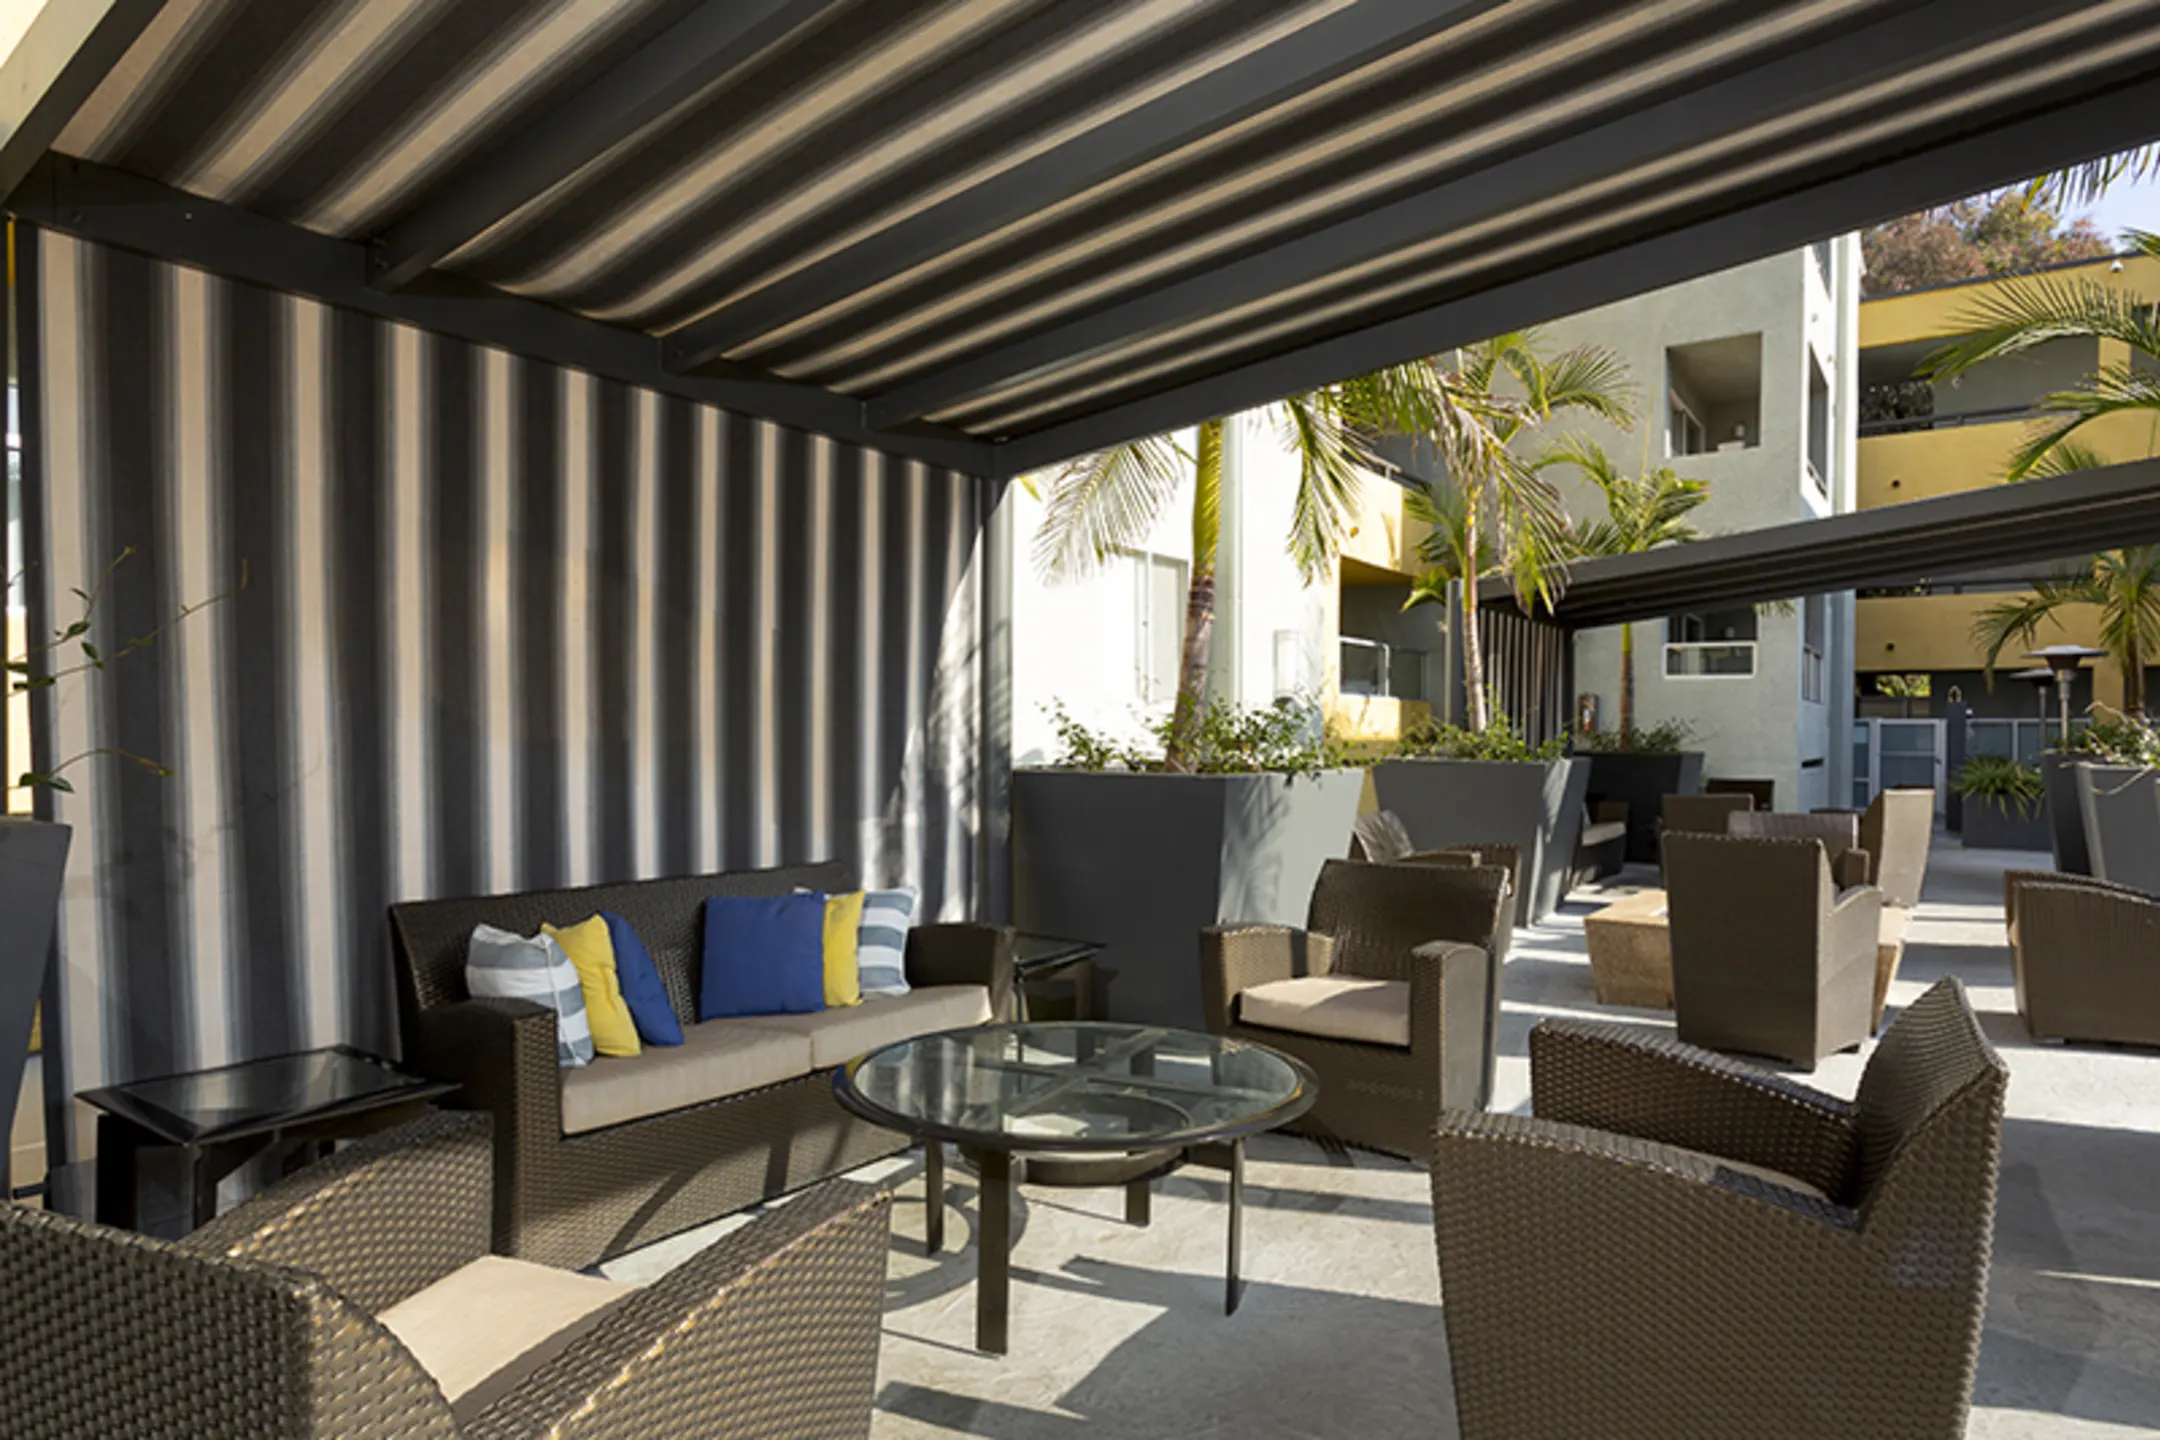 Patio / Deck - The Crescent at West Hollywood - West Hollywood, CA